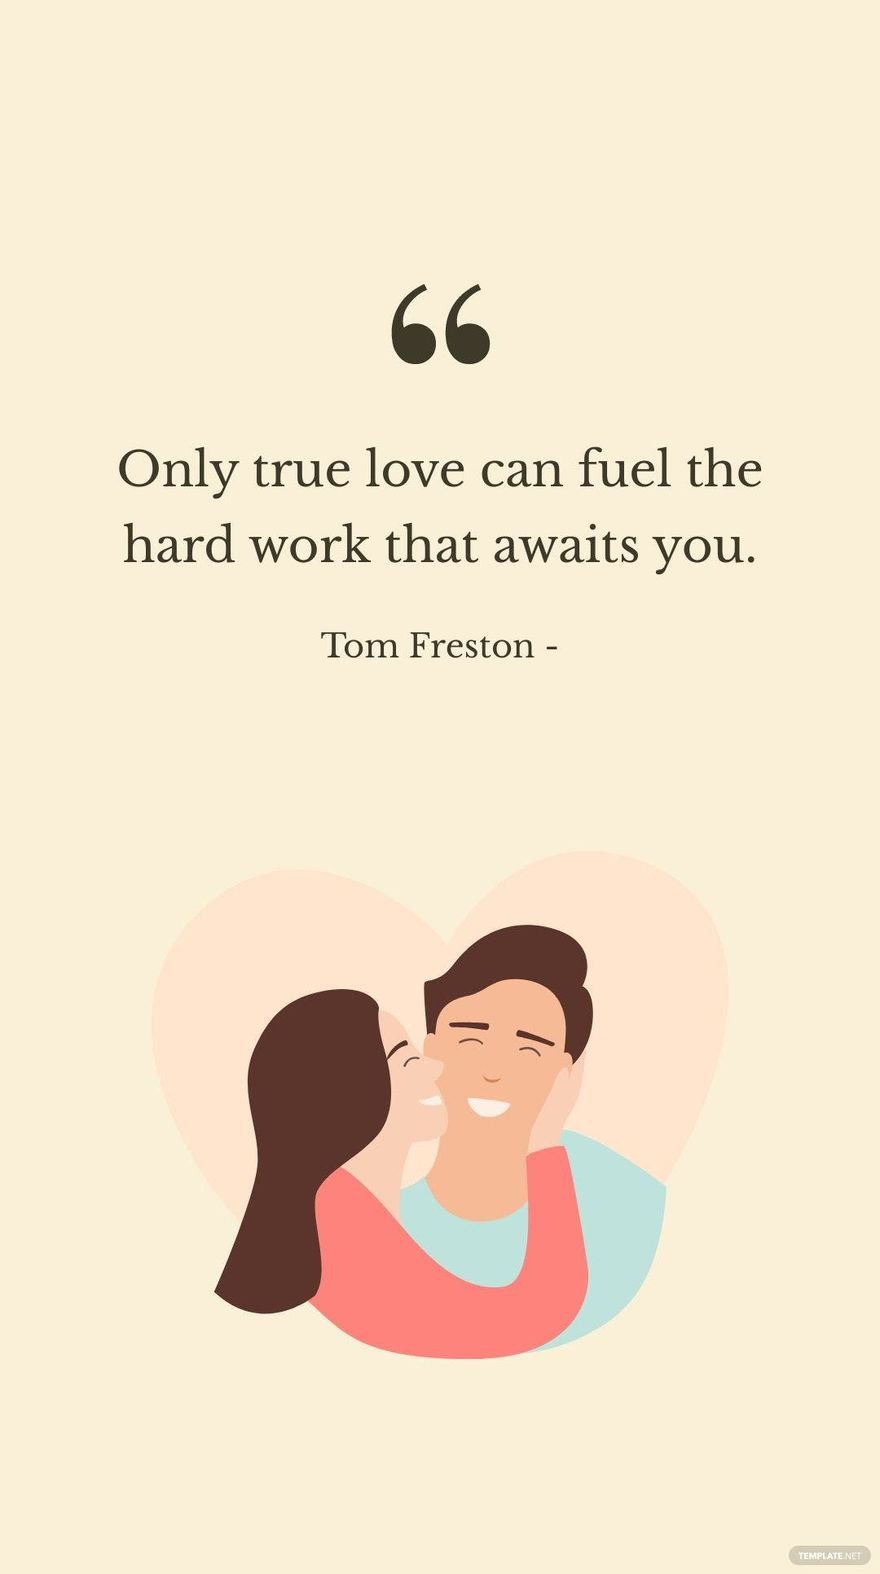 Tom Freston - Only true love can fuel the hard work that awaits you. in JPG